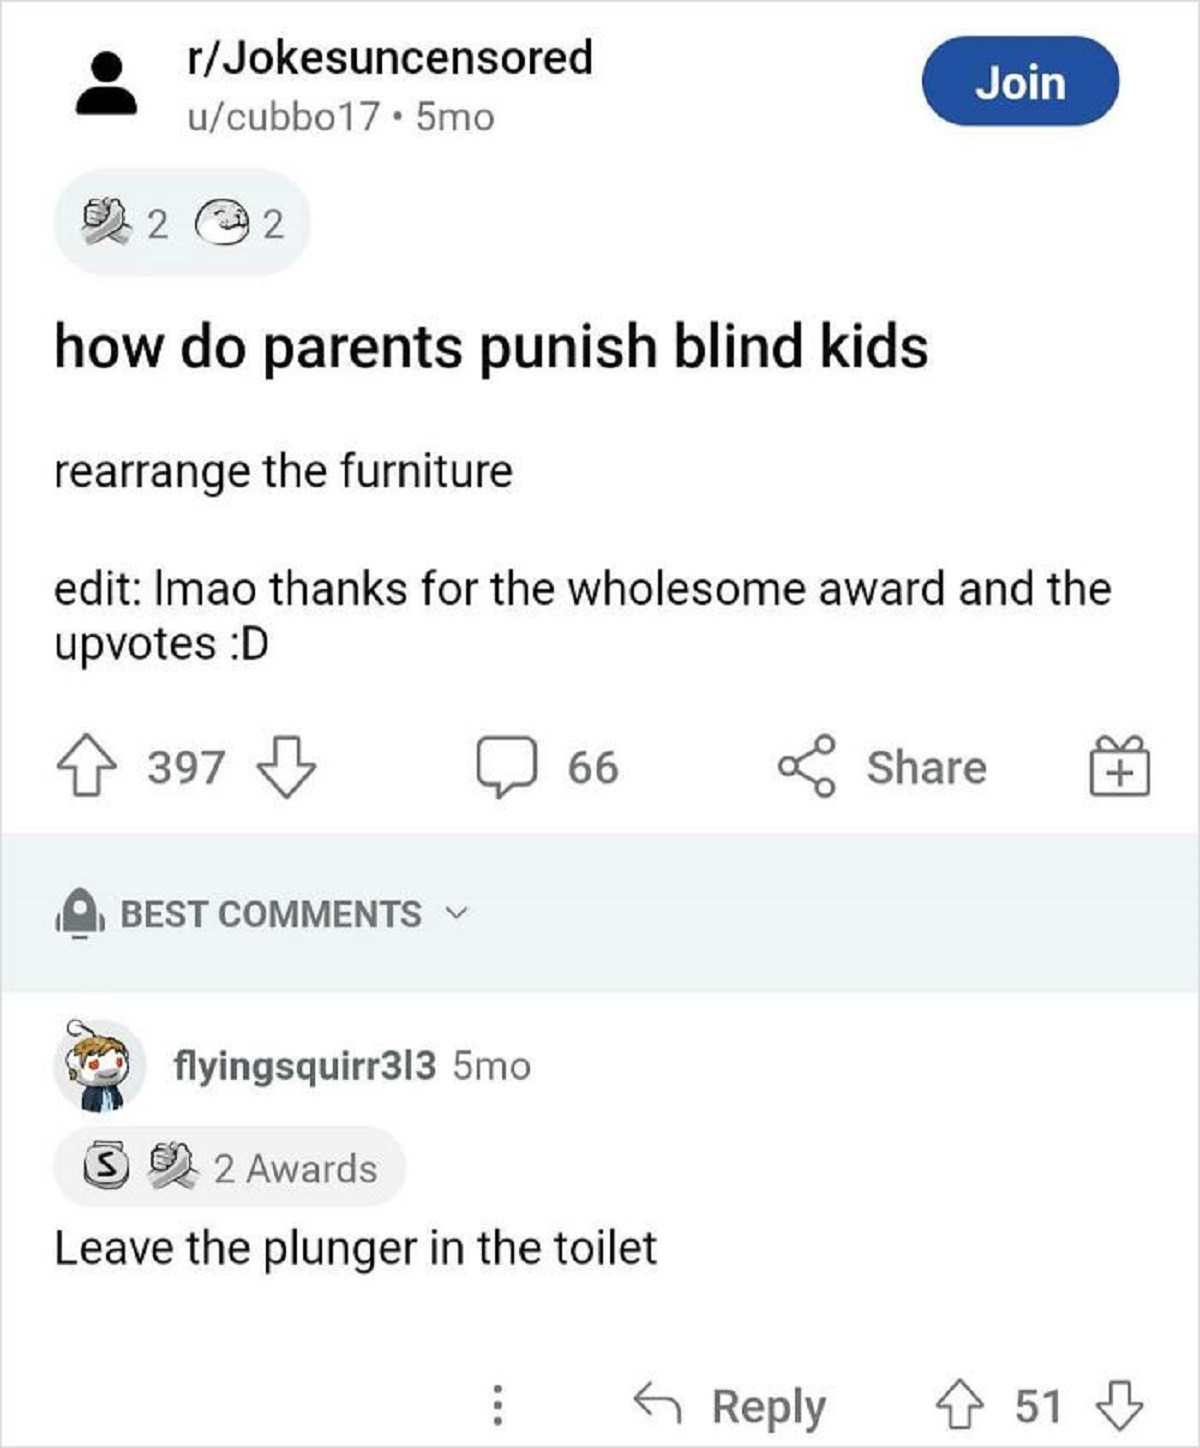 funny replies better than the original - screenshot - 2 rJokesuncensored ucubbo17. 5mo 2 how do parents punish blind kids rearrange the furniture 397 edit Imao thanks for the wholesome award and the upvotes D Best flyingsquirr313 5mo 66 S 2 Awards Leave t